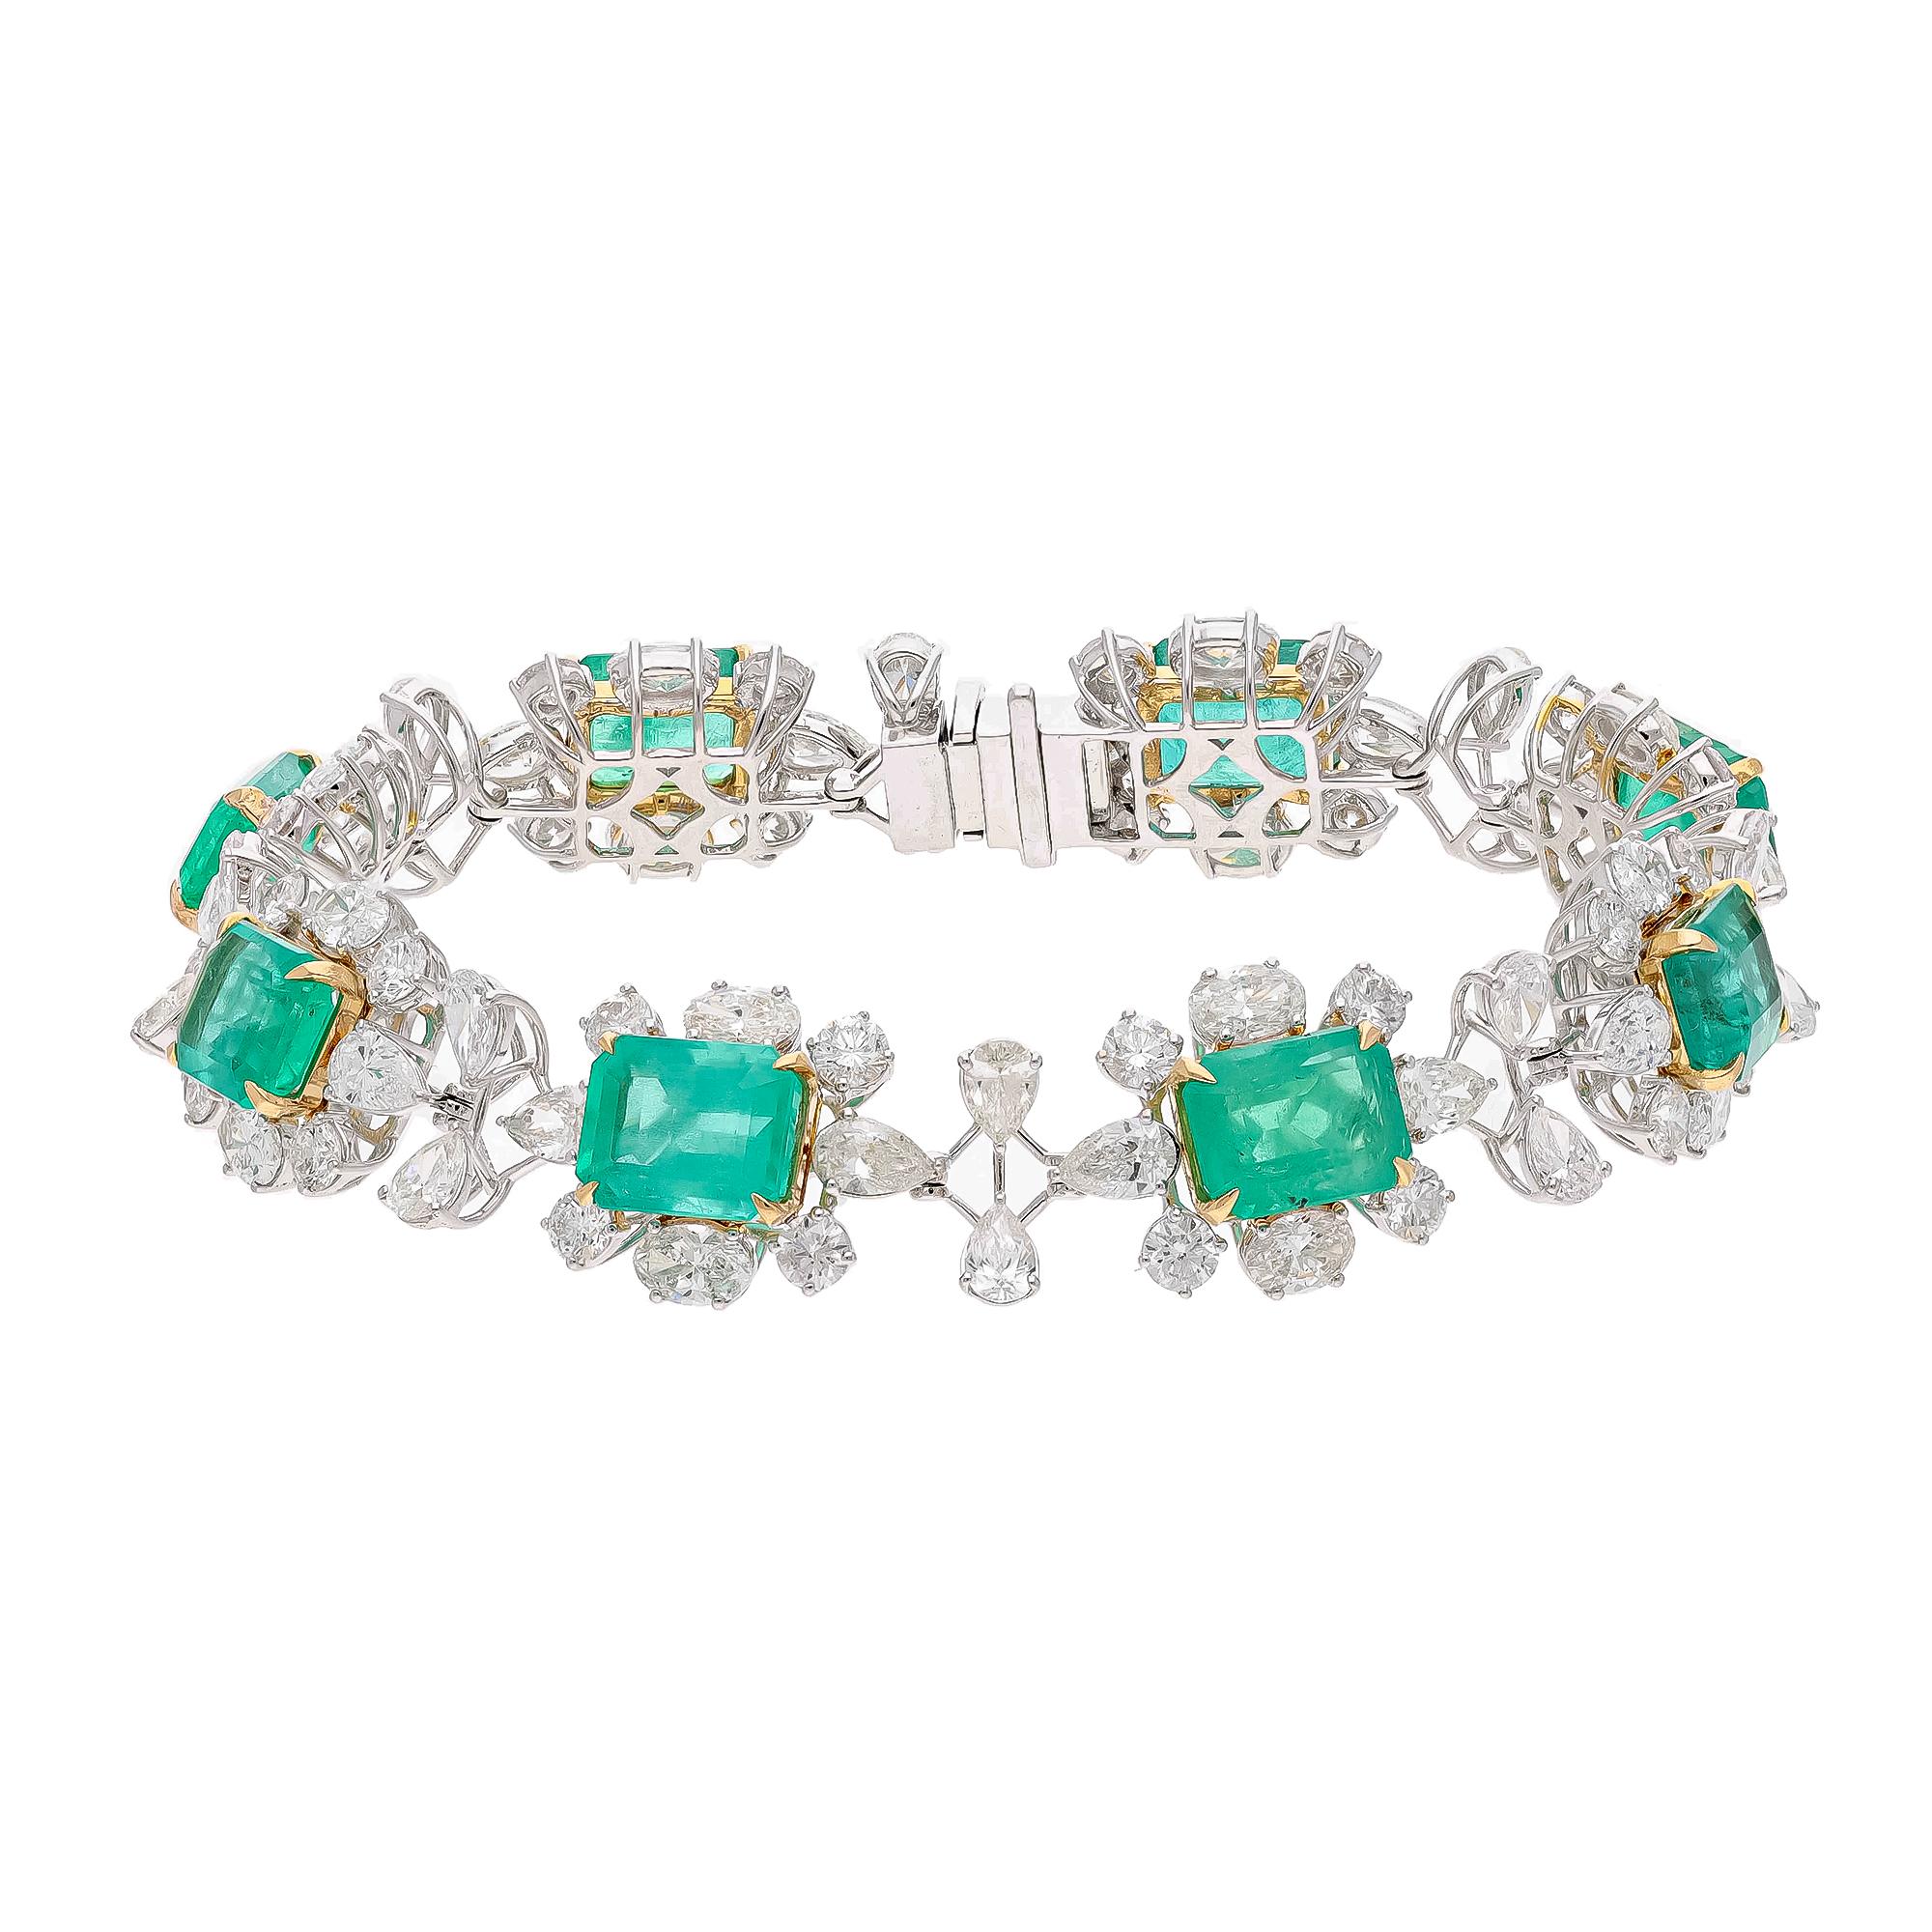 This is a natural Zambian Emerald bracelet with diamonds and 18k gold. The emeralds are very high quality and very good quality diamonds the clarity is vsi and G colour


Emeralds : 19.35 carats
diamonds : 12.67 carats
gold : 19.406 gms

This is a